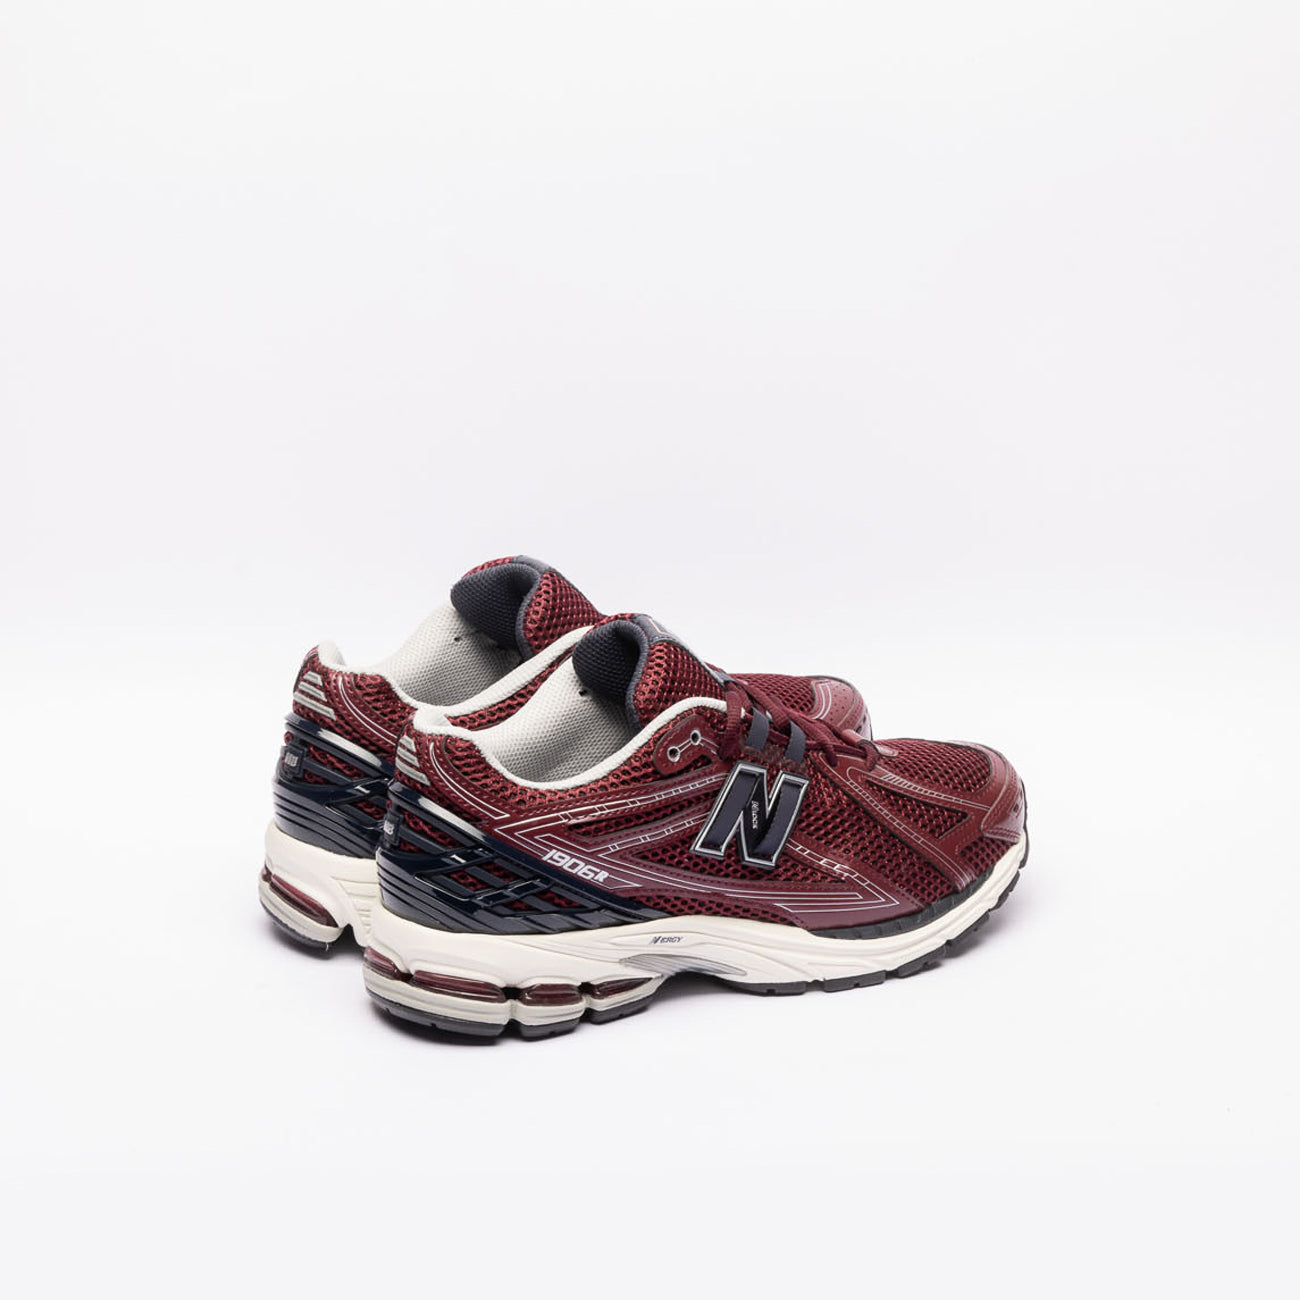 New Balance 1906R burgundy leather and fabric fashion running sneaker